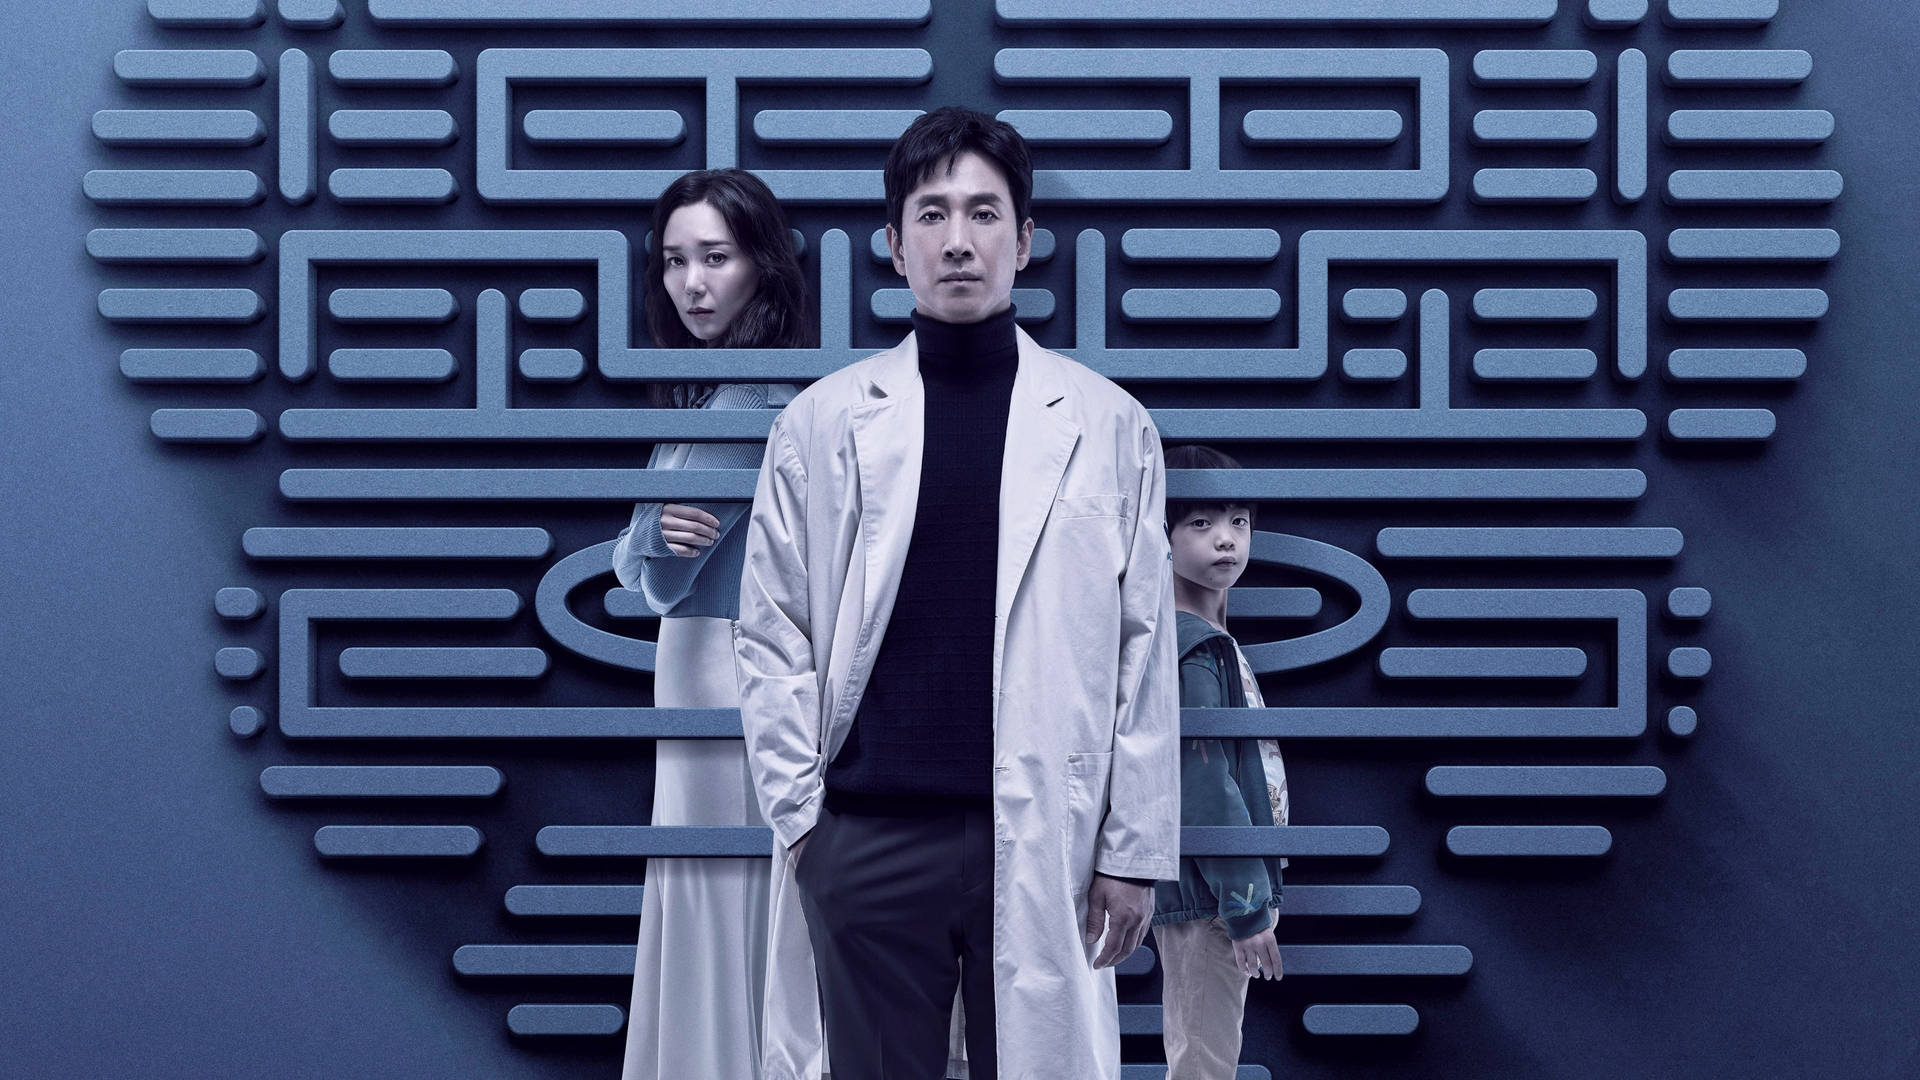 Drbrain Cerebral Korean Drama Can Be Translated To Spanish As 